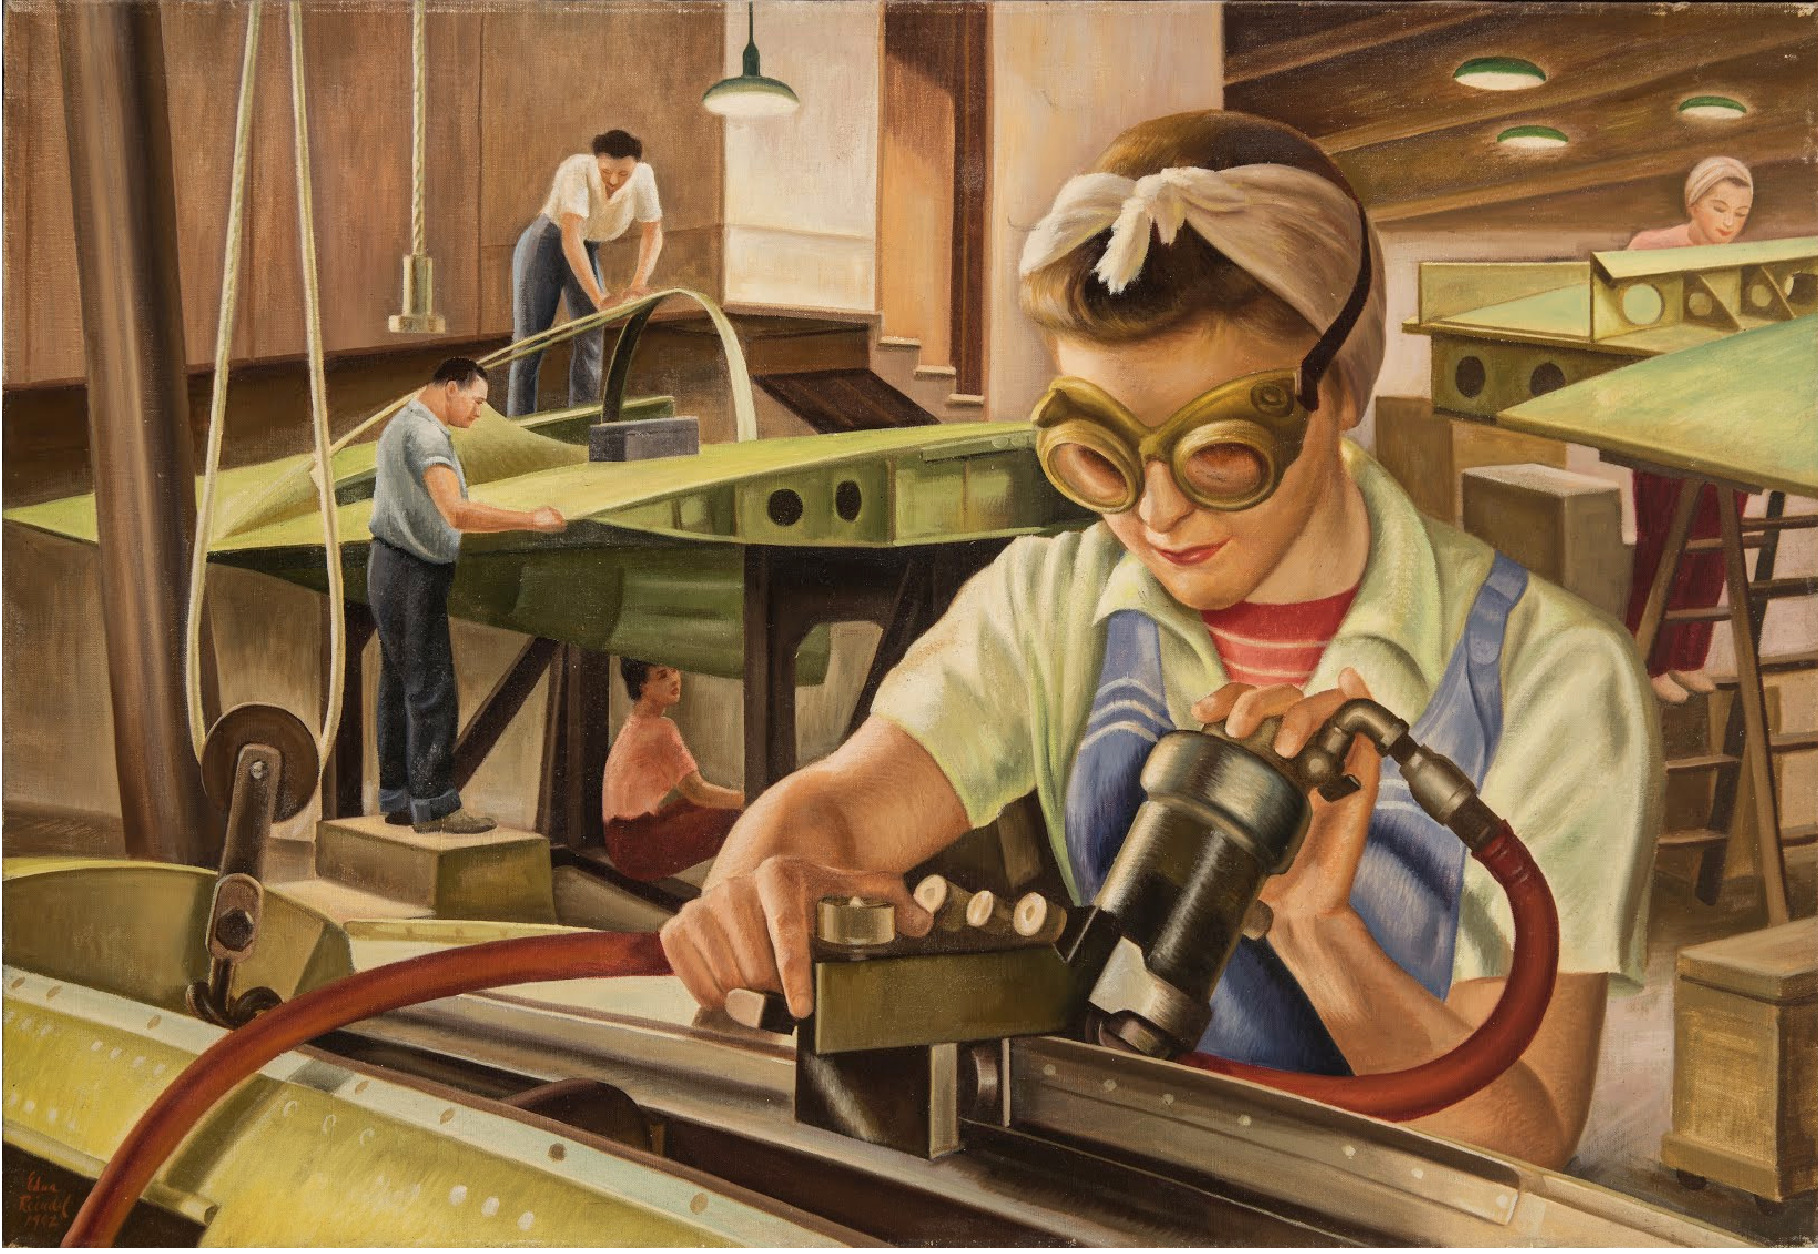 Paint of a woman in overalls working in a factory, with three other workers behind her.